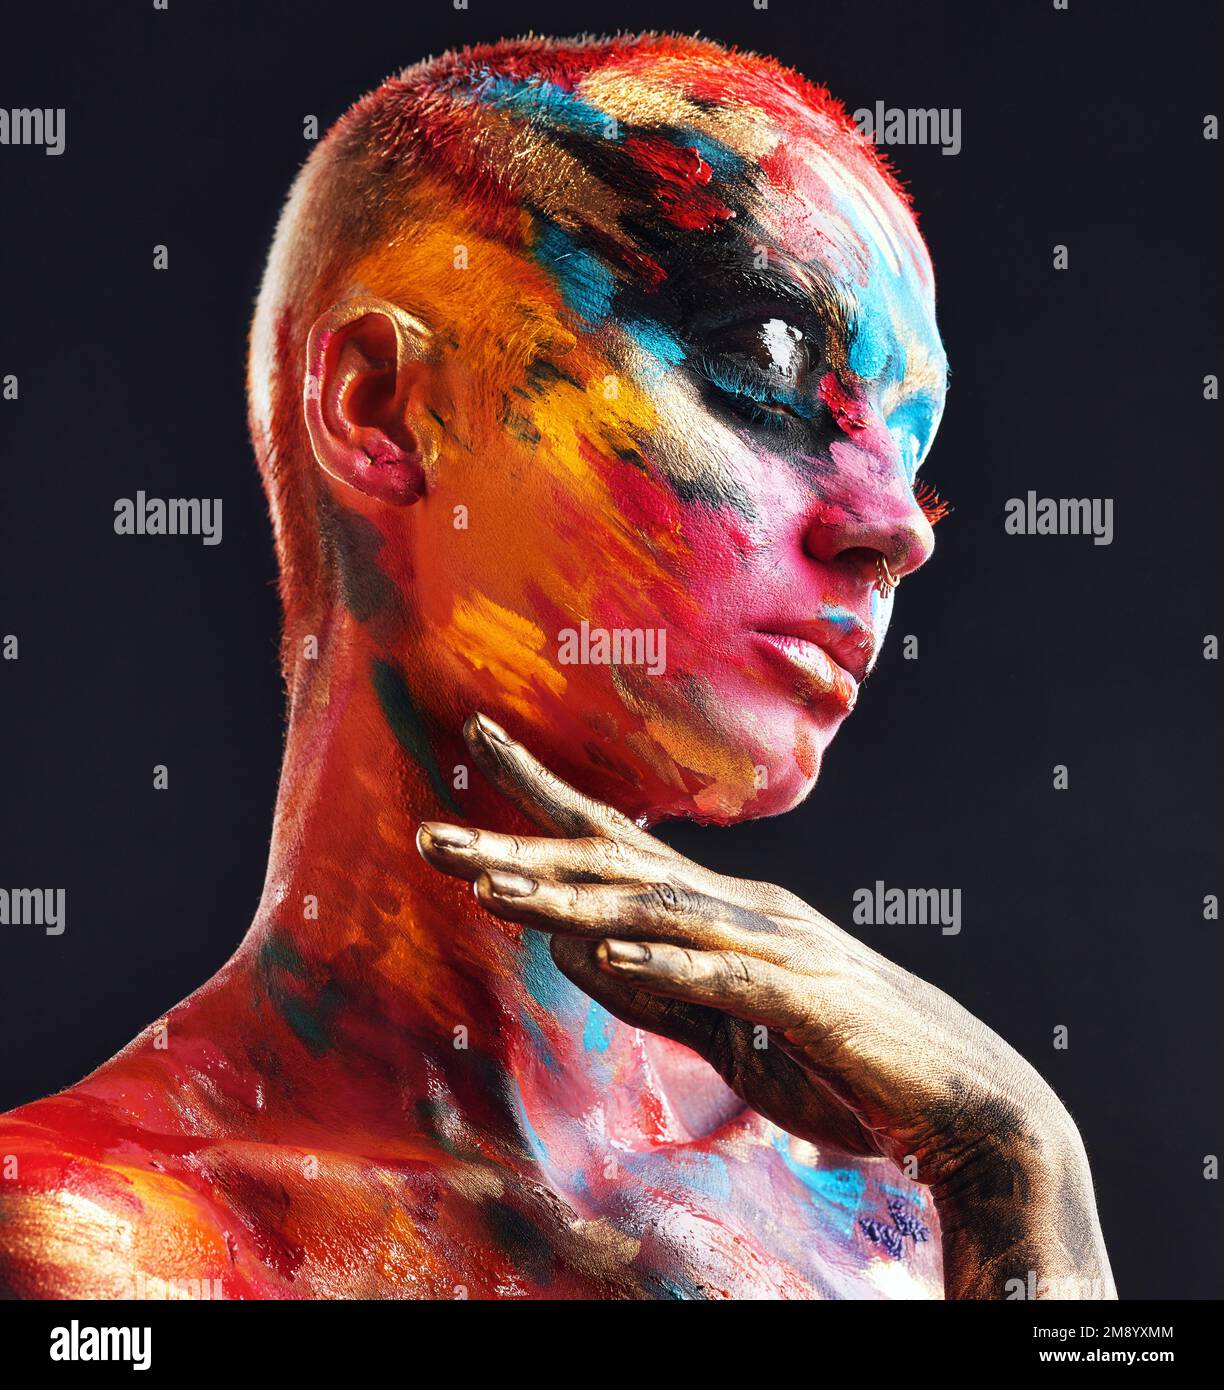 Weird but beautiful. an attractive young woman posing alone in the studio with paint on her face and body. Stock Photo